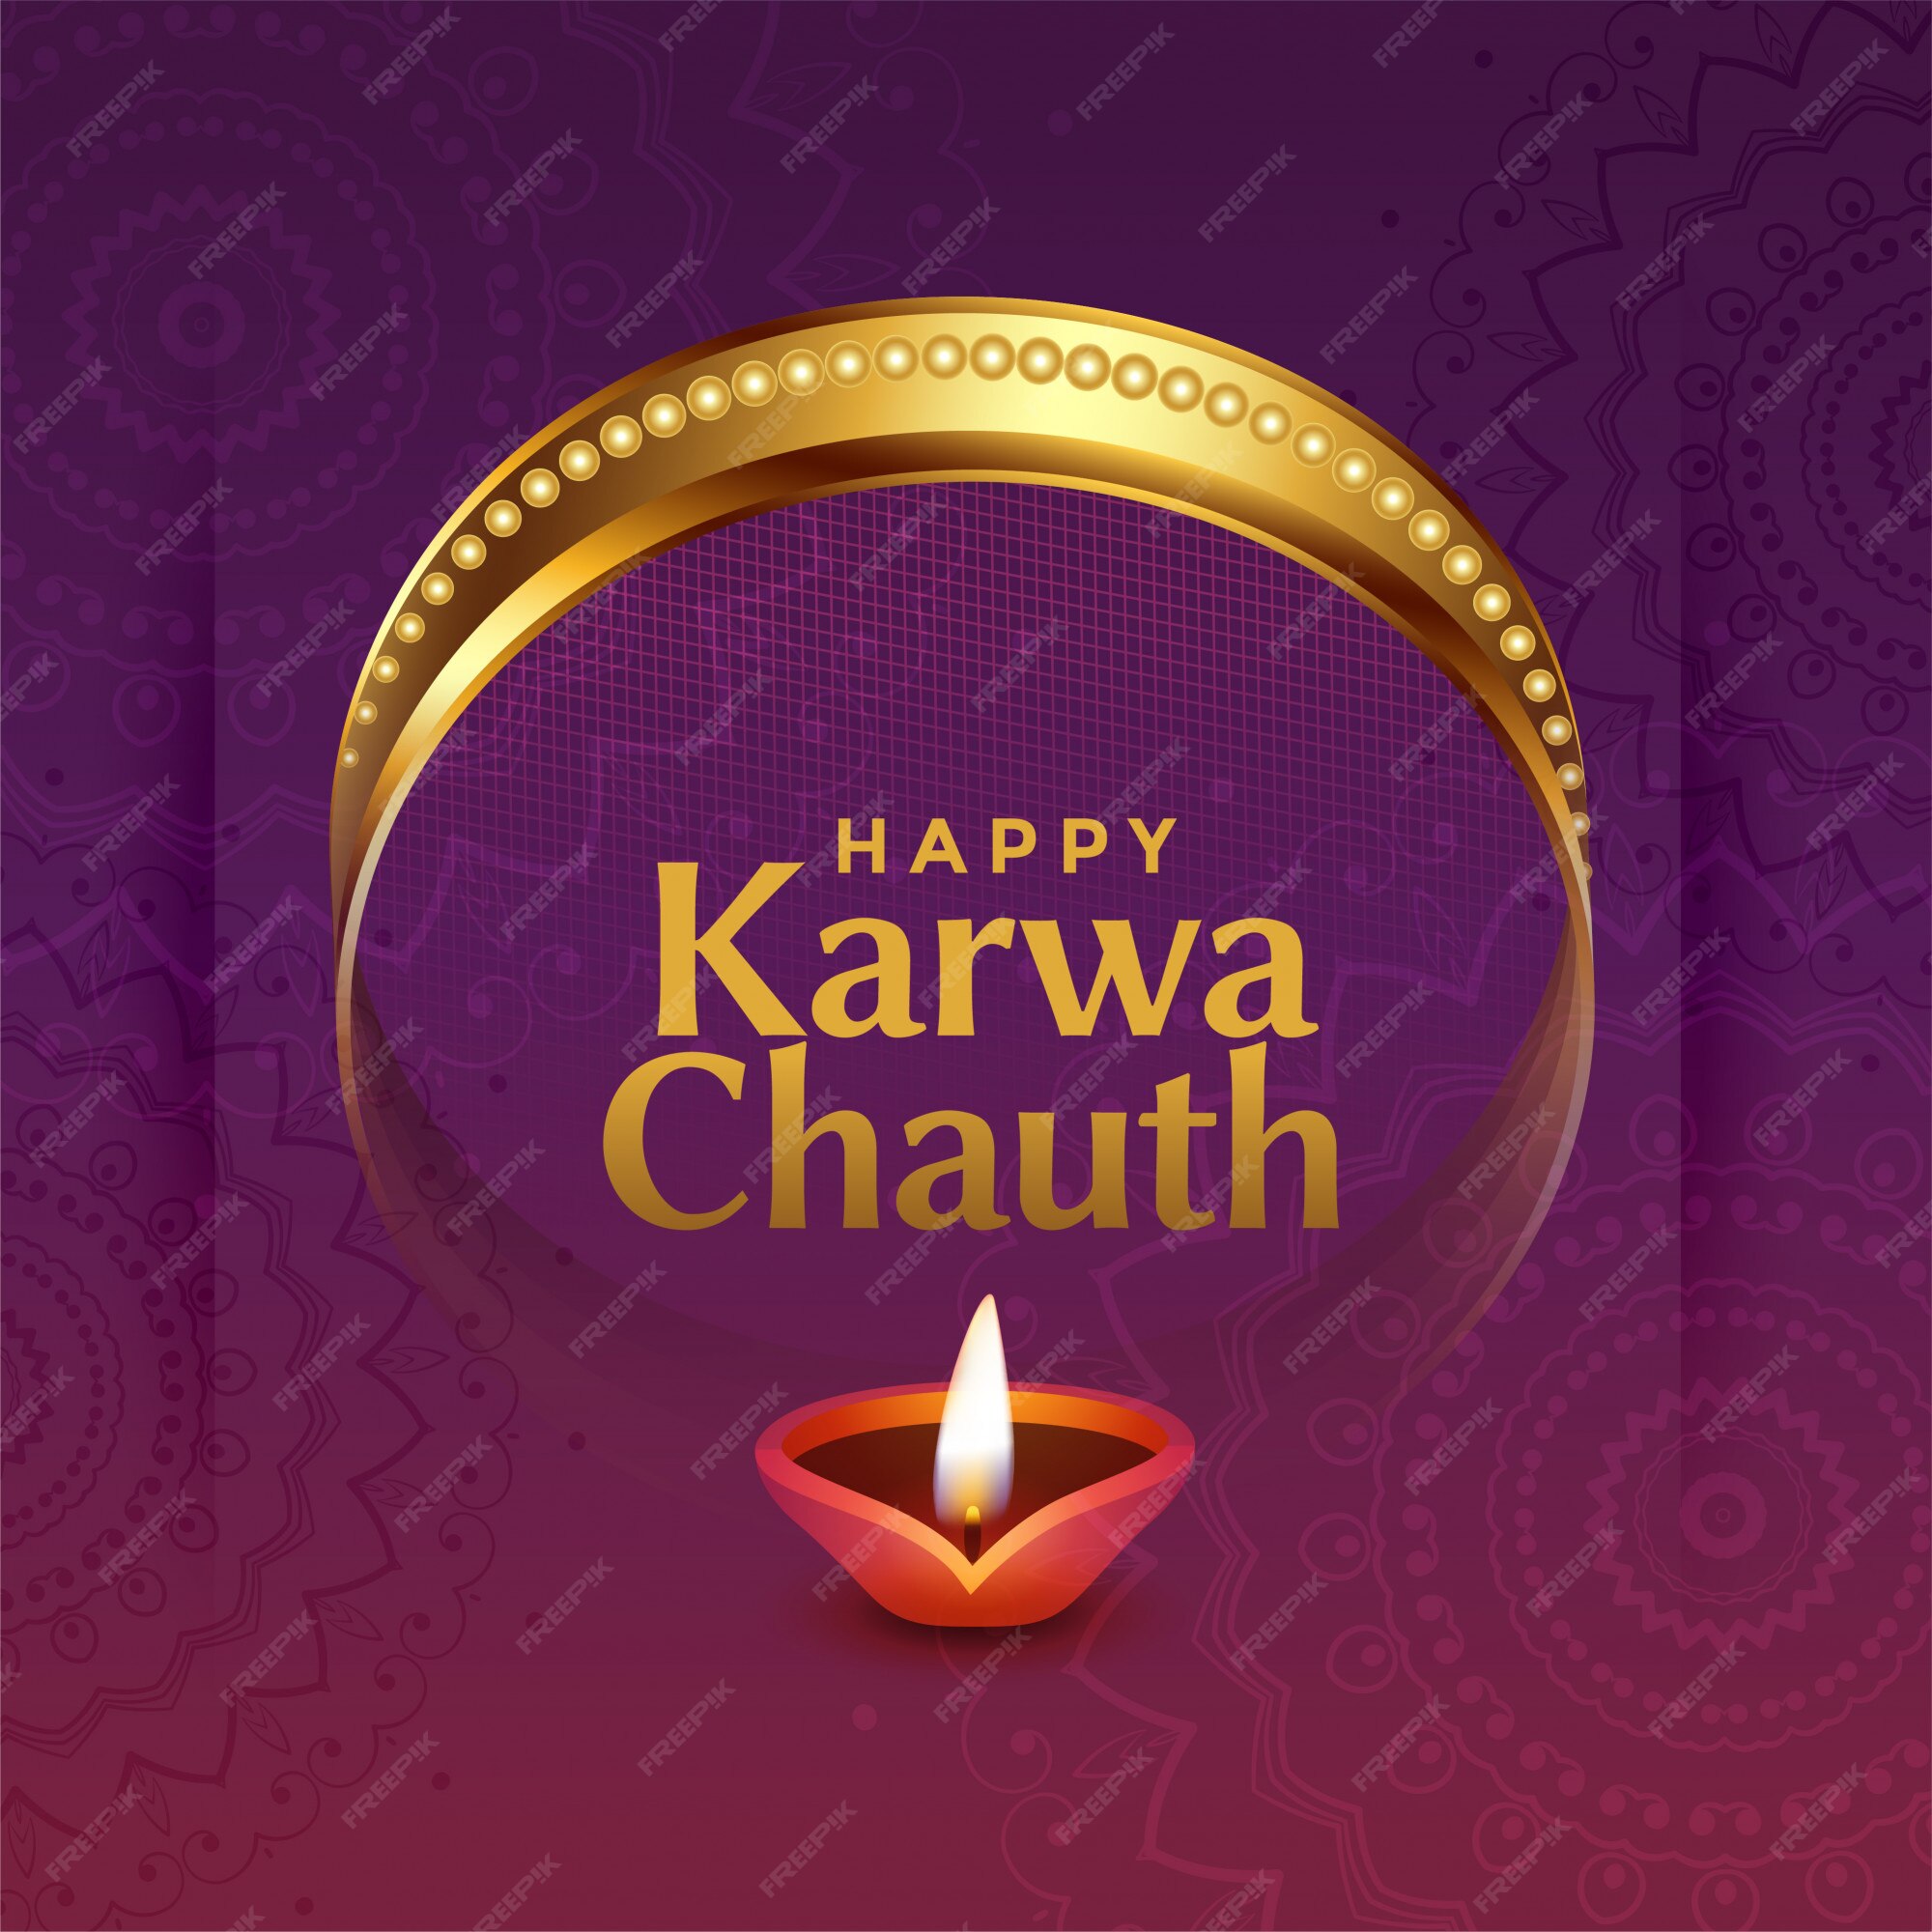 Free Vector | Lovely karwa chauth indian festival greeting with decorative  elements